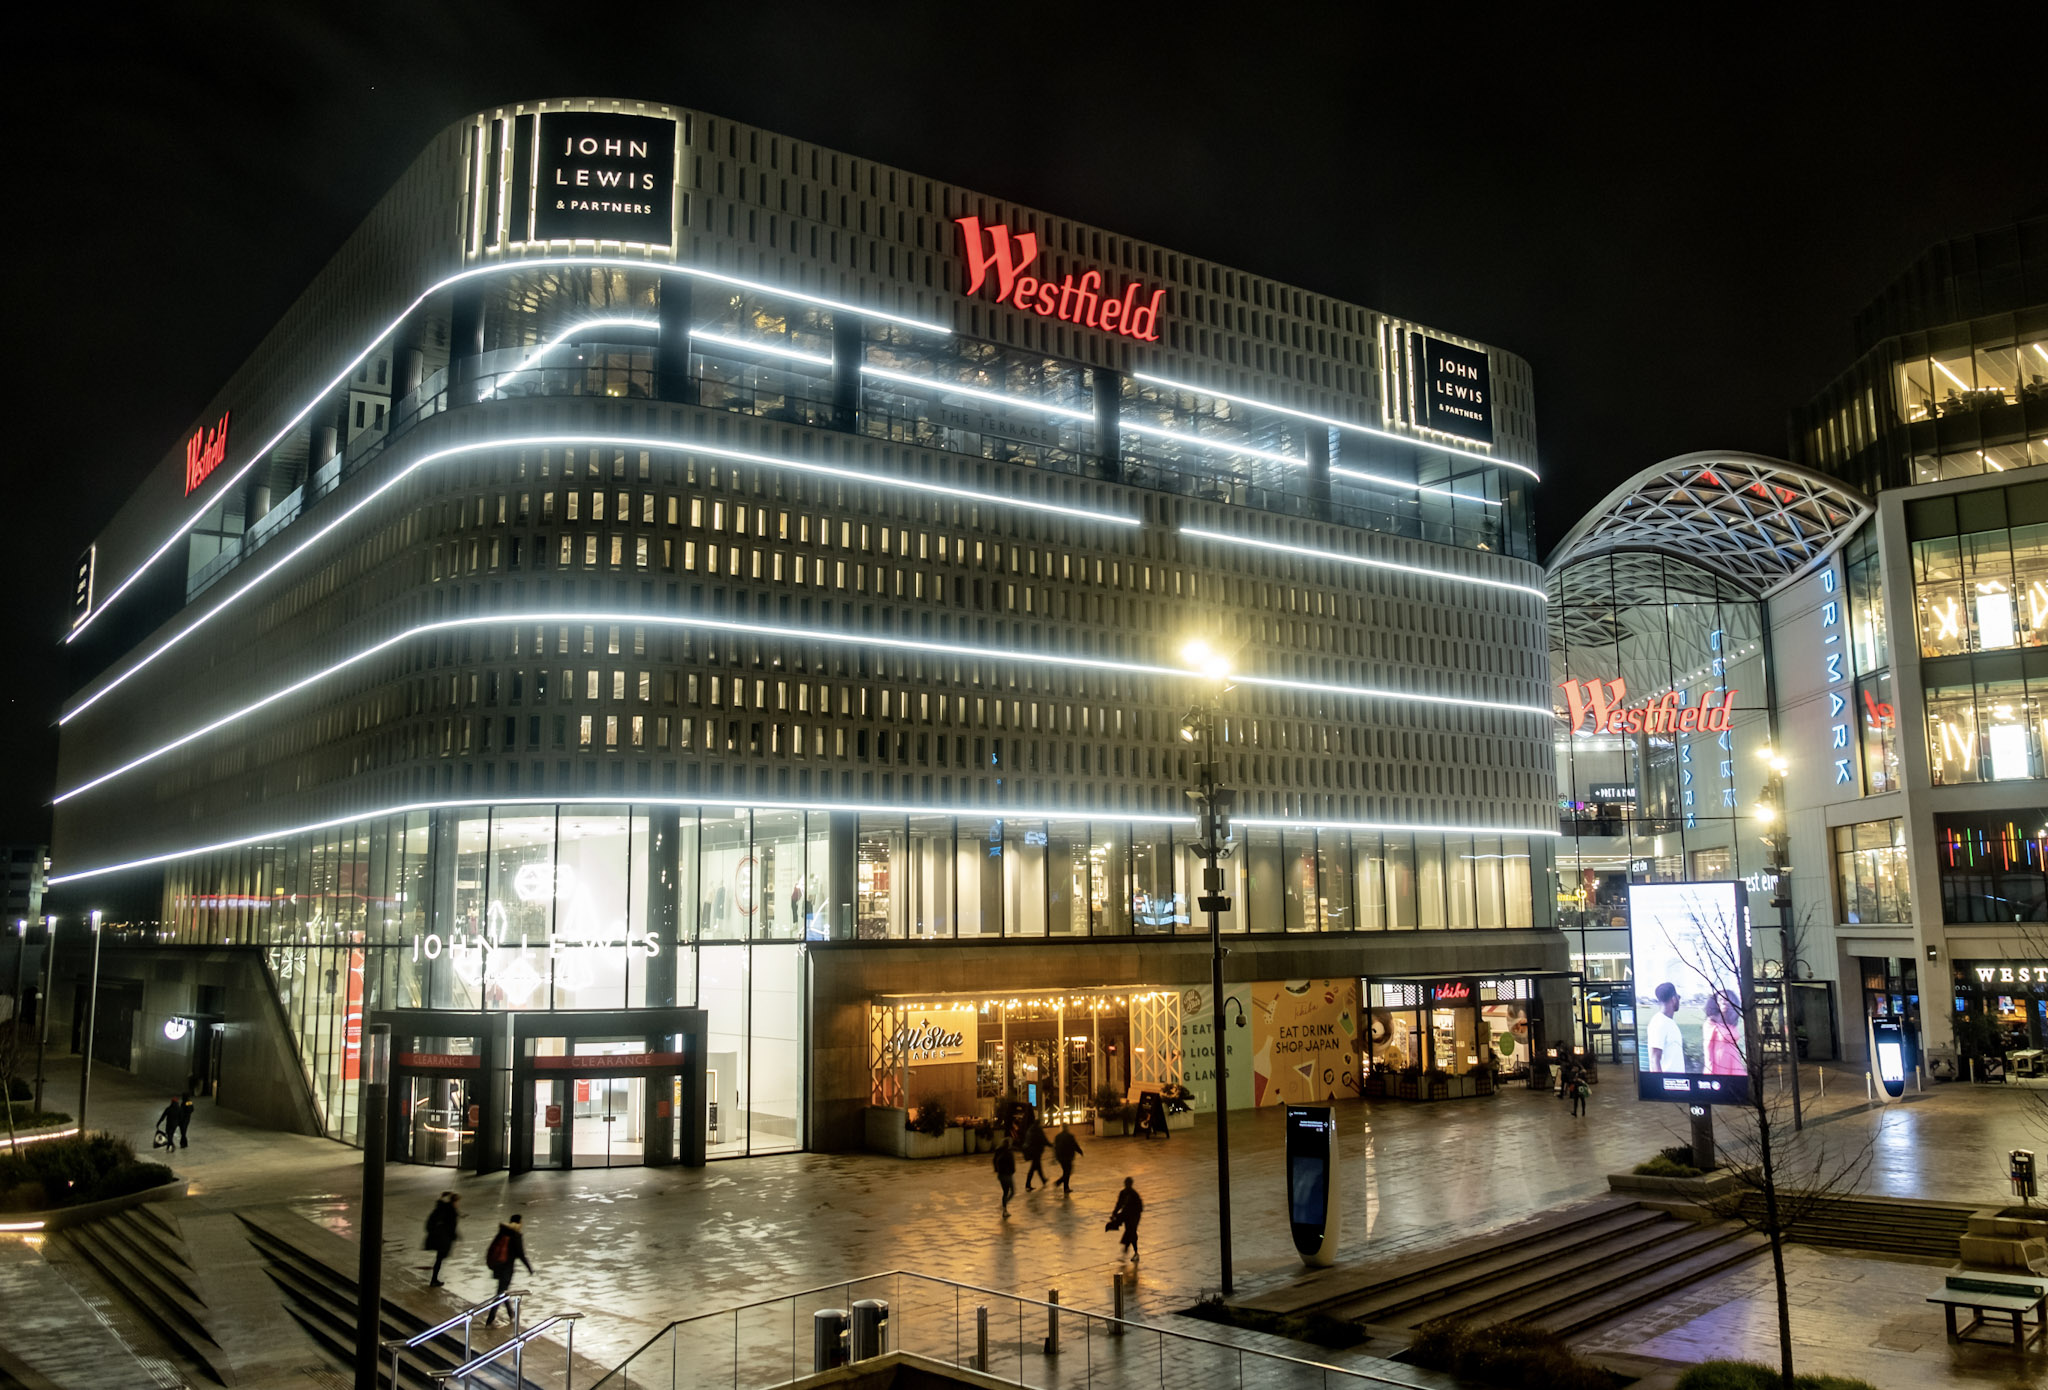 a stock photo of the Westfield shopping centre in Shepherd's Bush, London